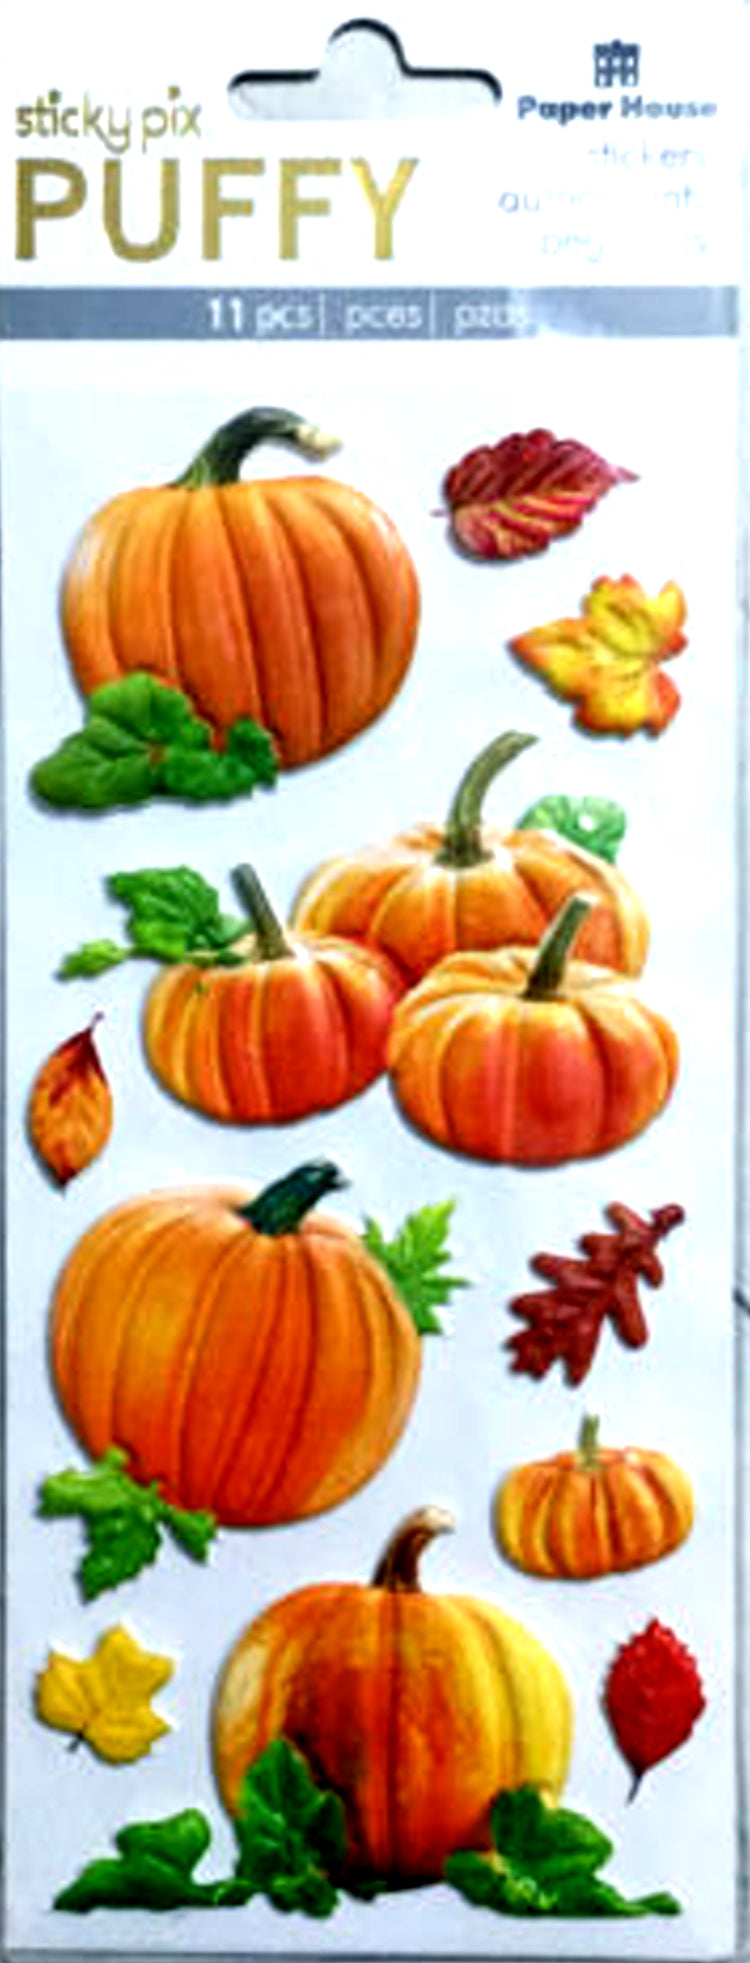 Paper House Sticky Pix Puffy Dimensional Fall Pumpkin Stickers